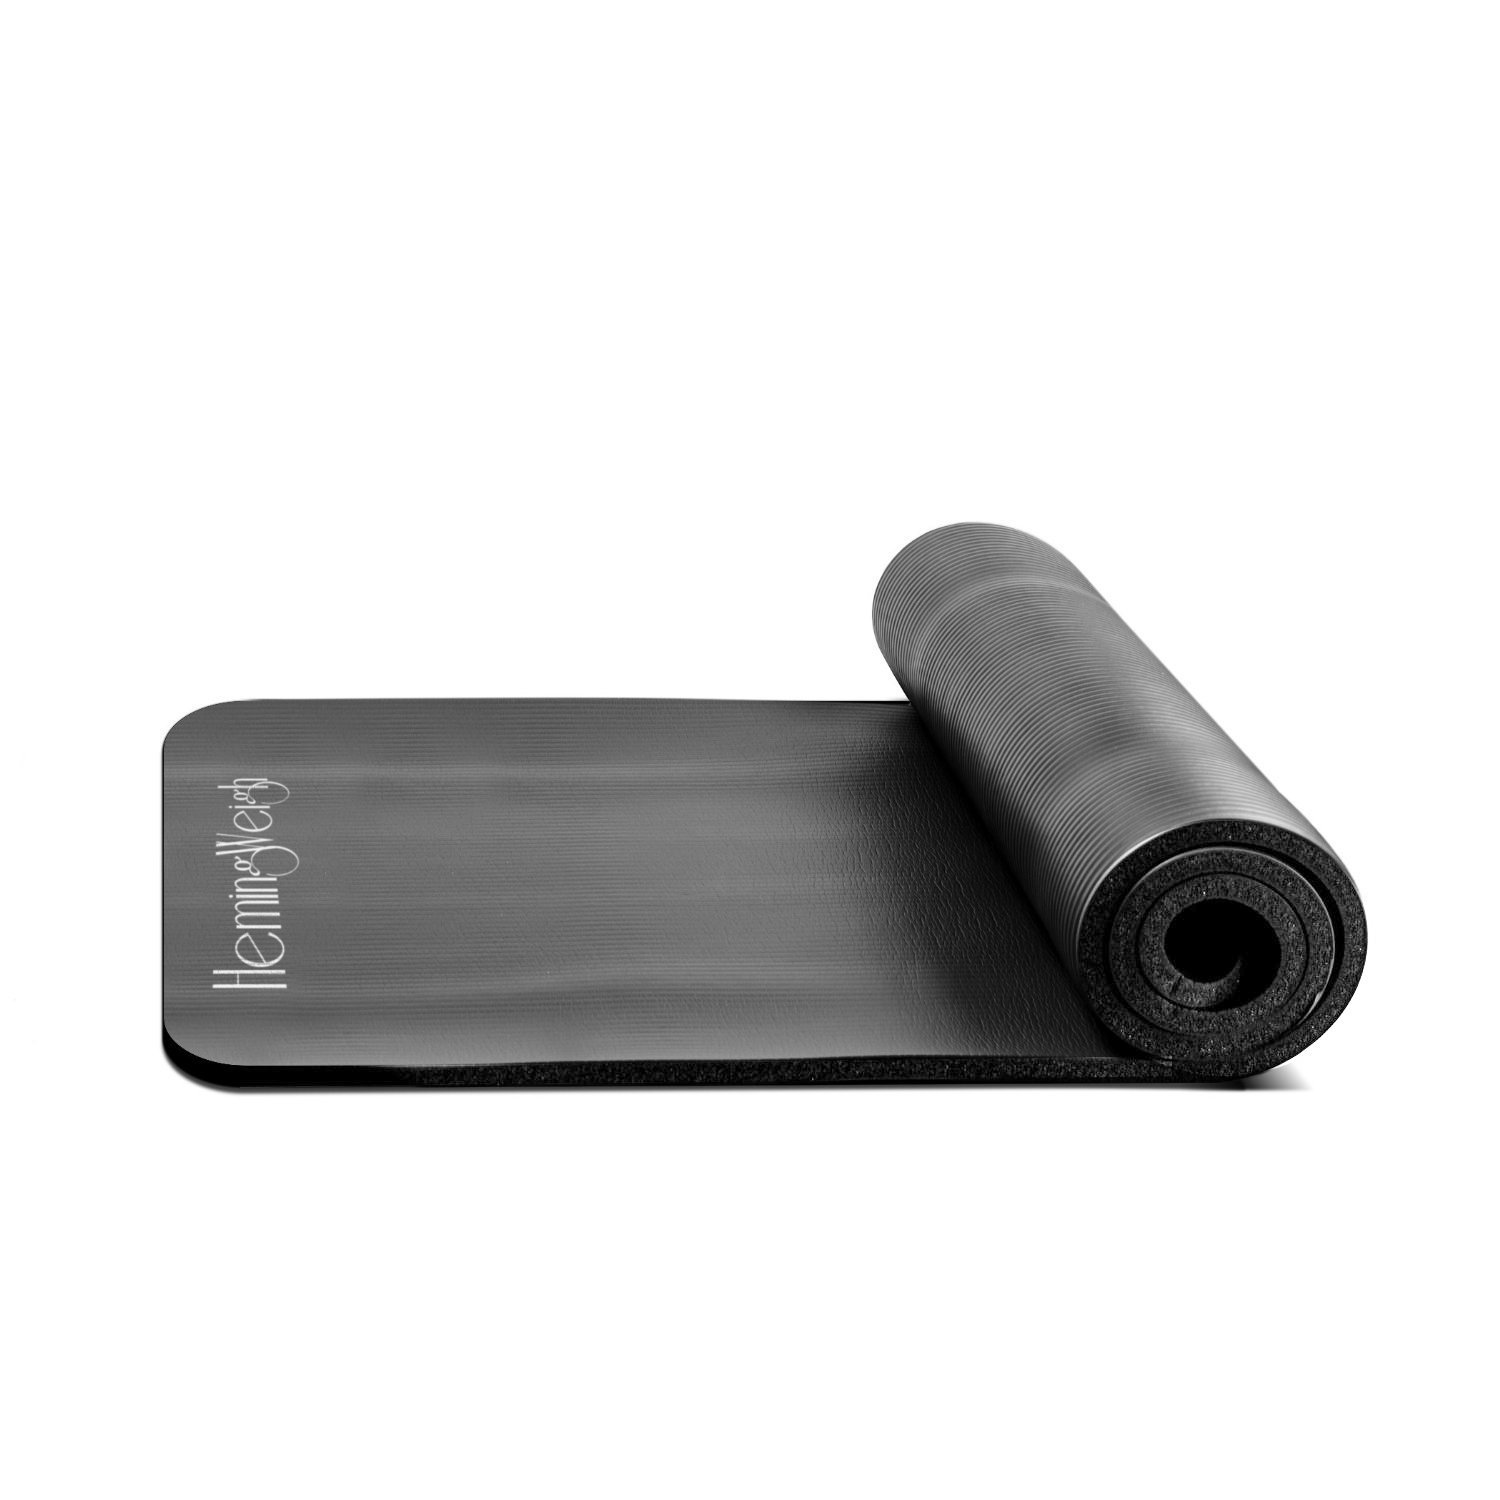 extra thick foam exercise mat